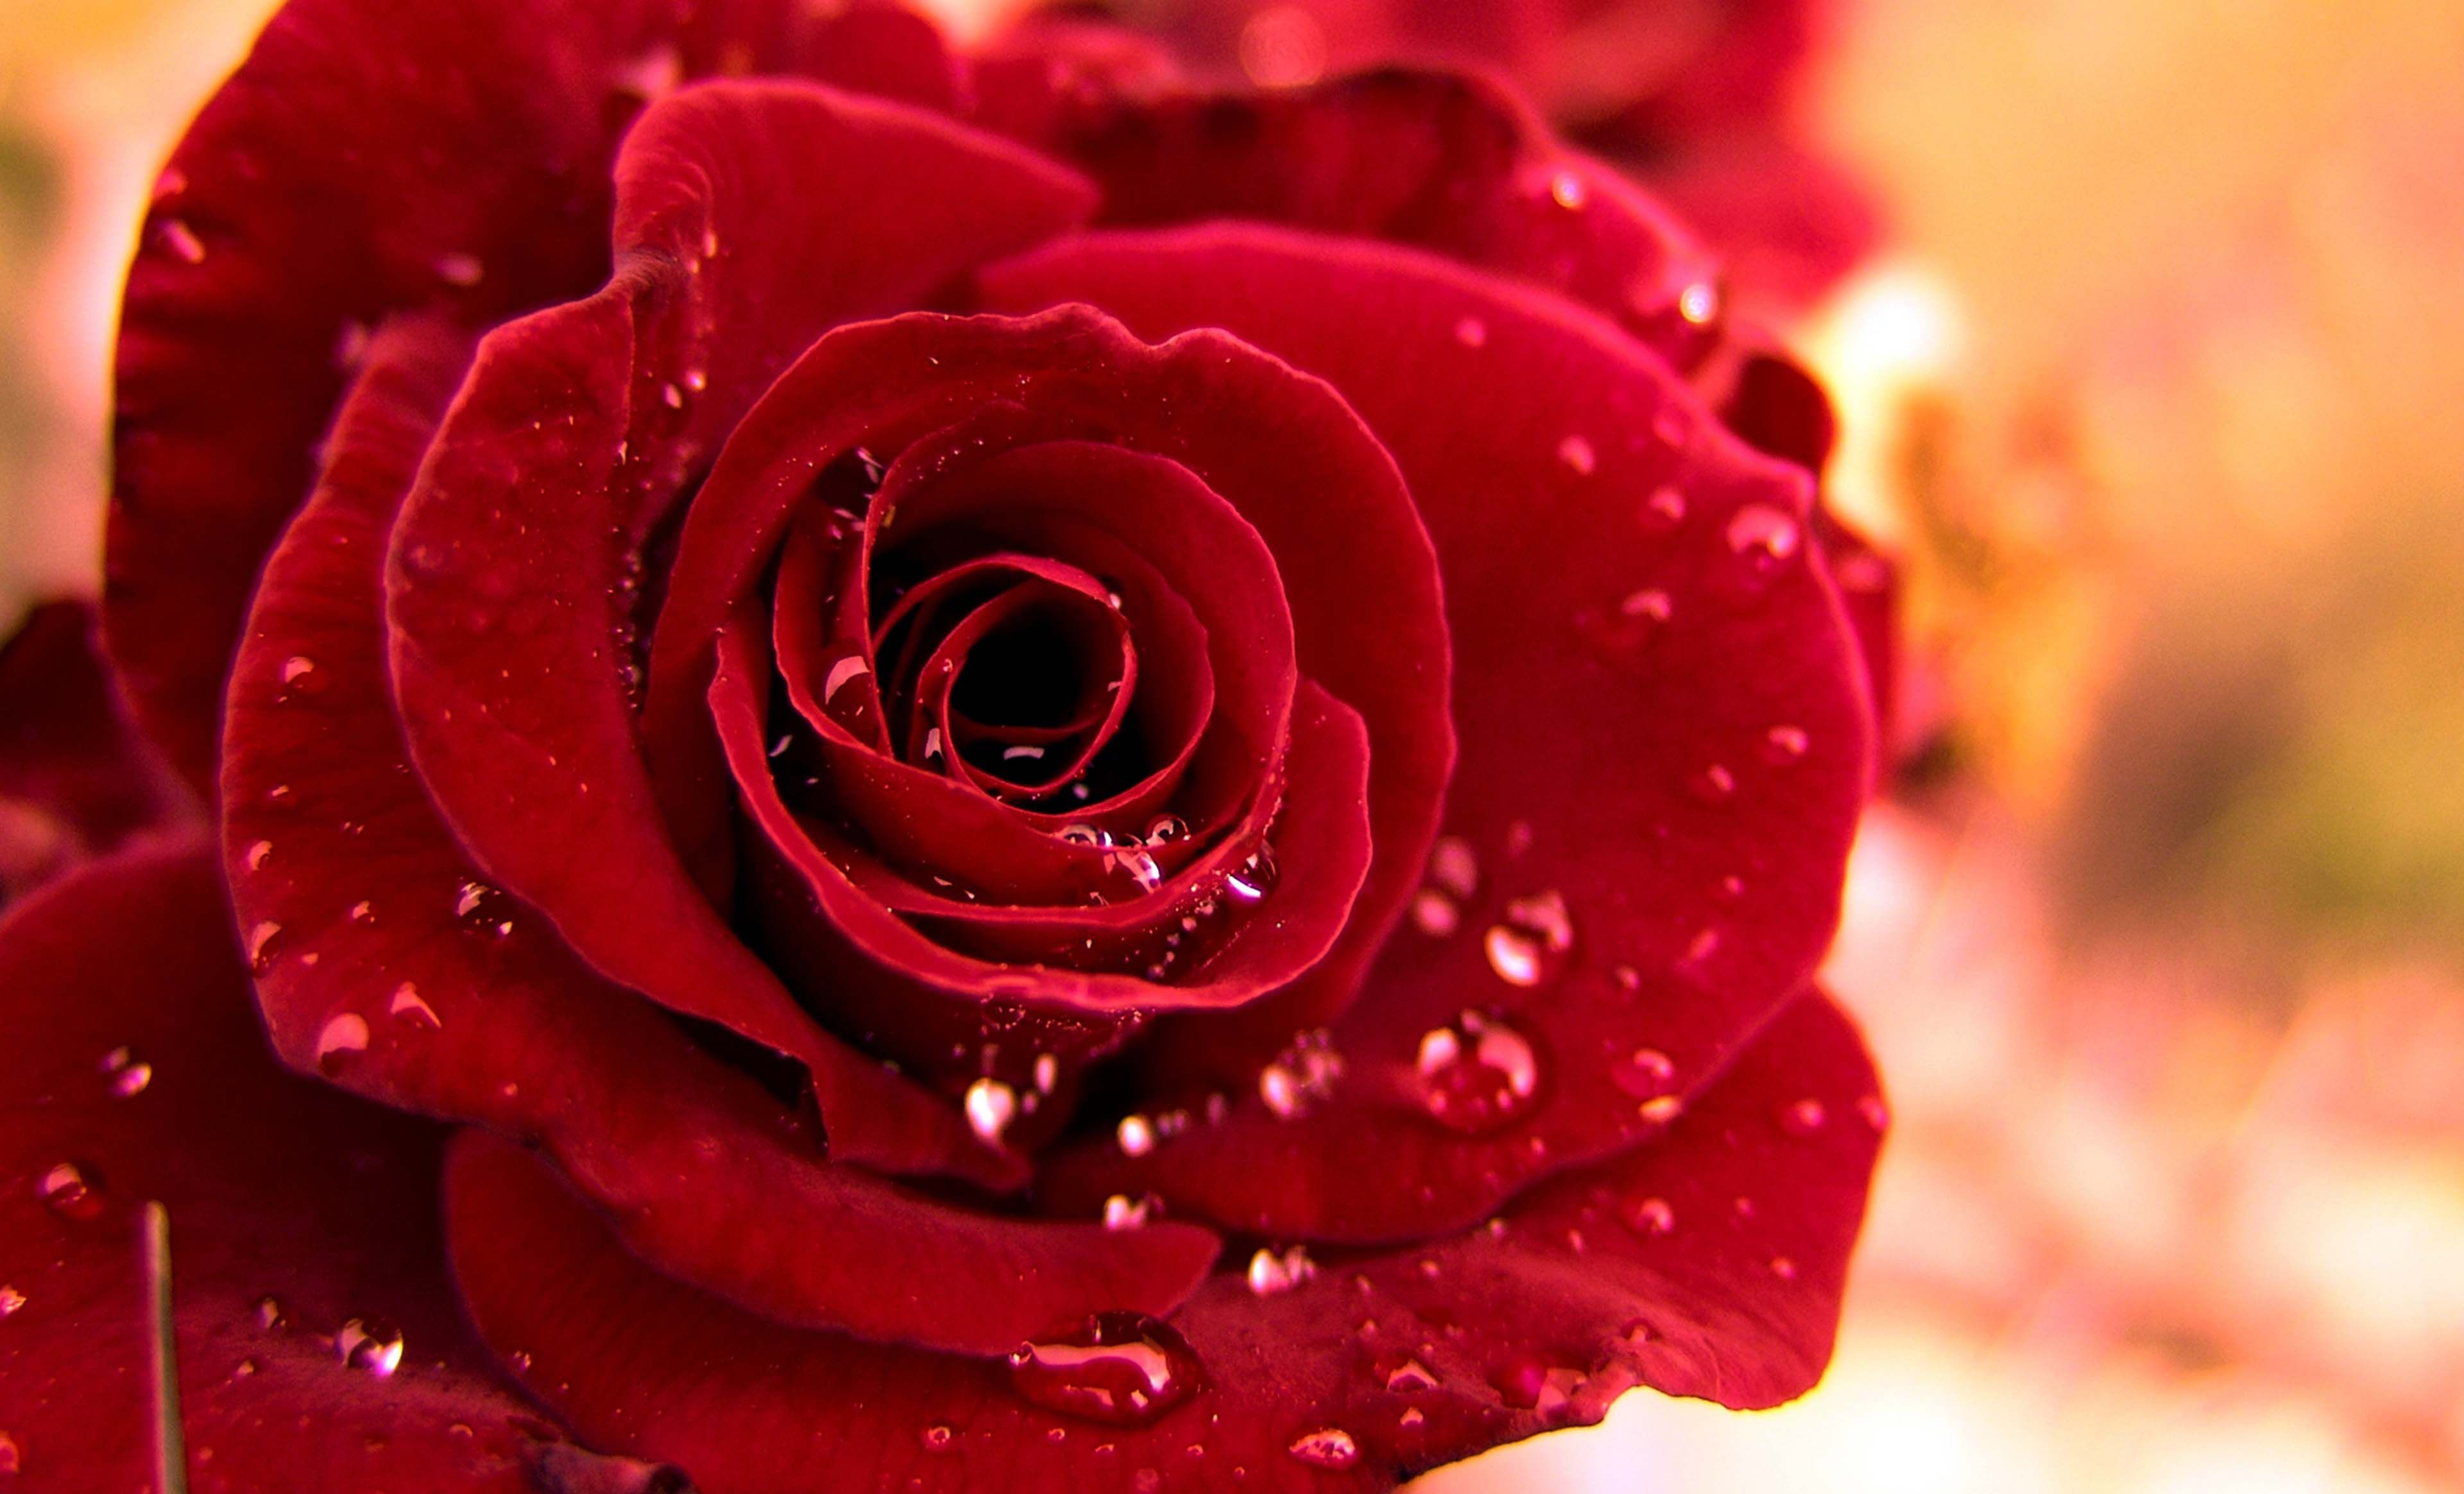 Water Drops Roses Astonishing Wallpaper HD. Red roses, Beautiful roses, Beautiful red roses